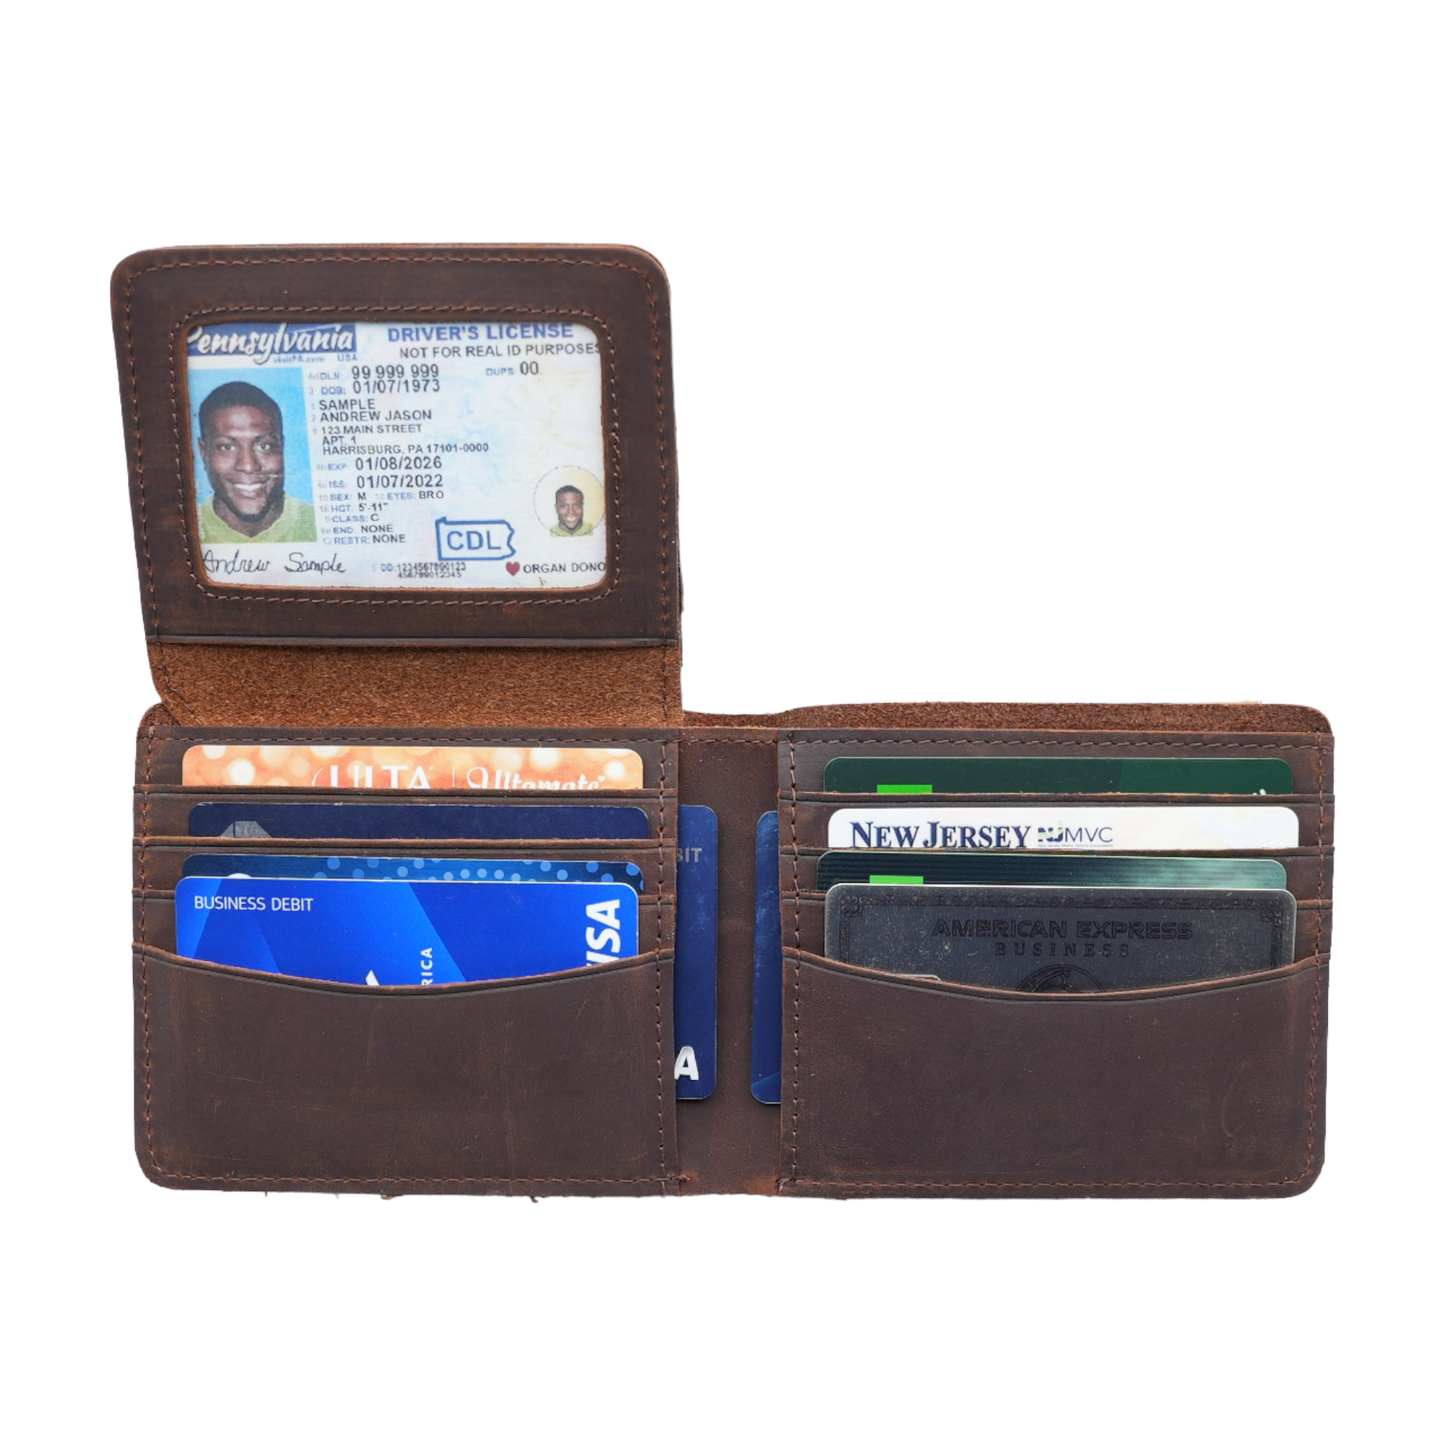 Genuine Leather Wallet for Men w/Flap out ID Window.